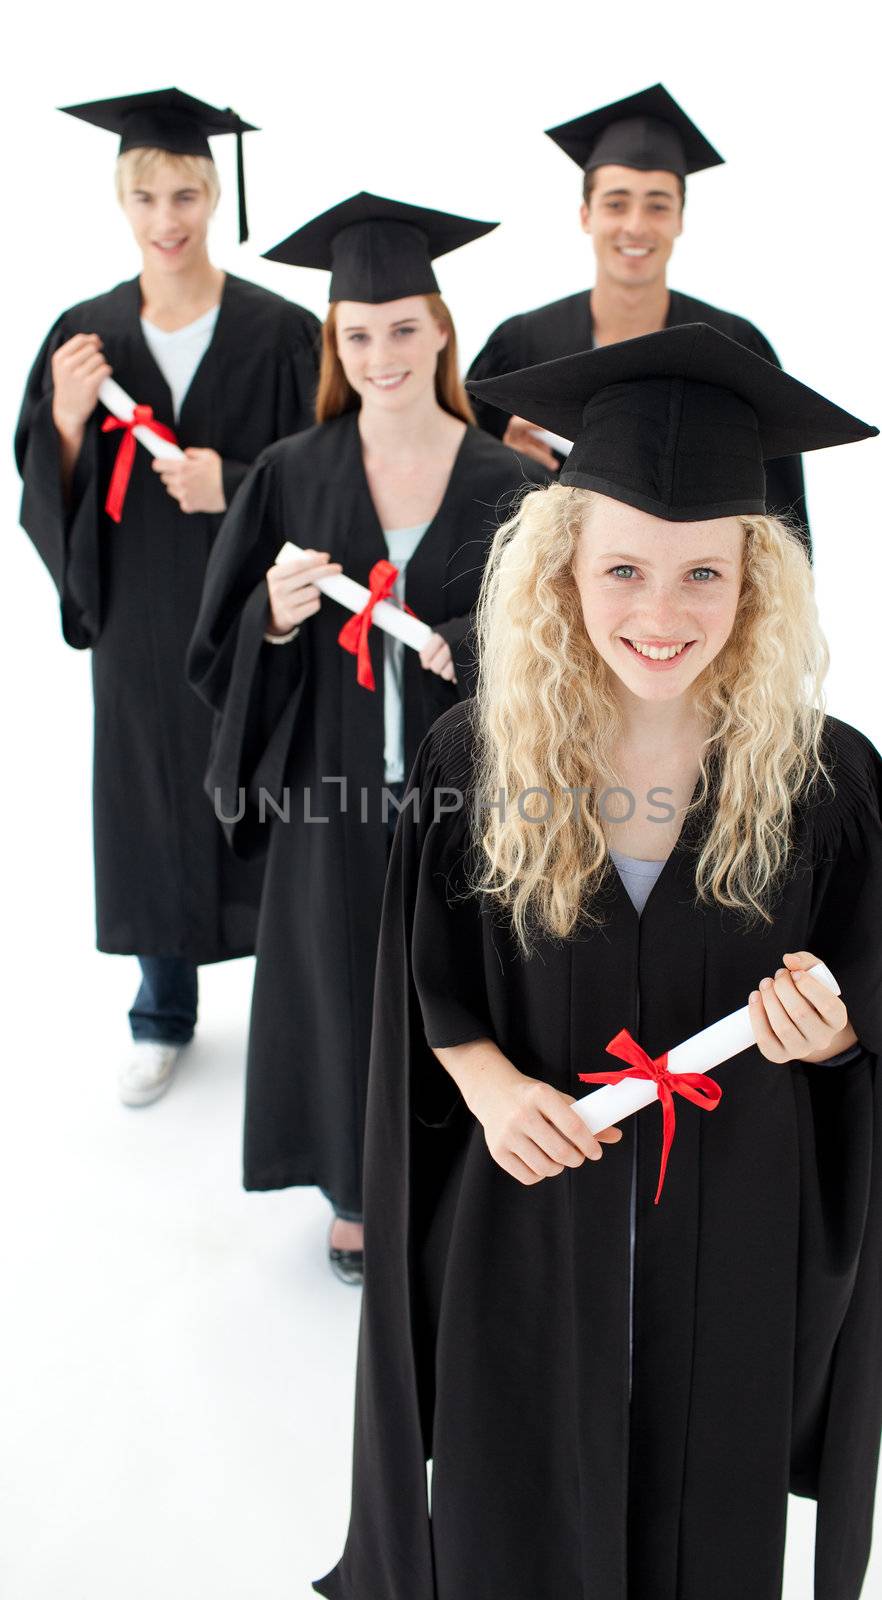 Smiling group of teenagers celebrating after Graduation by Wavebreakmedia